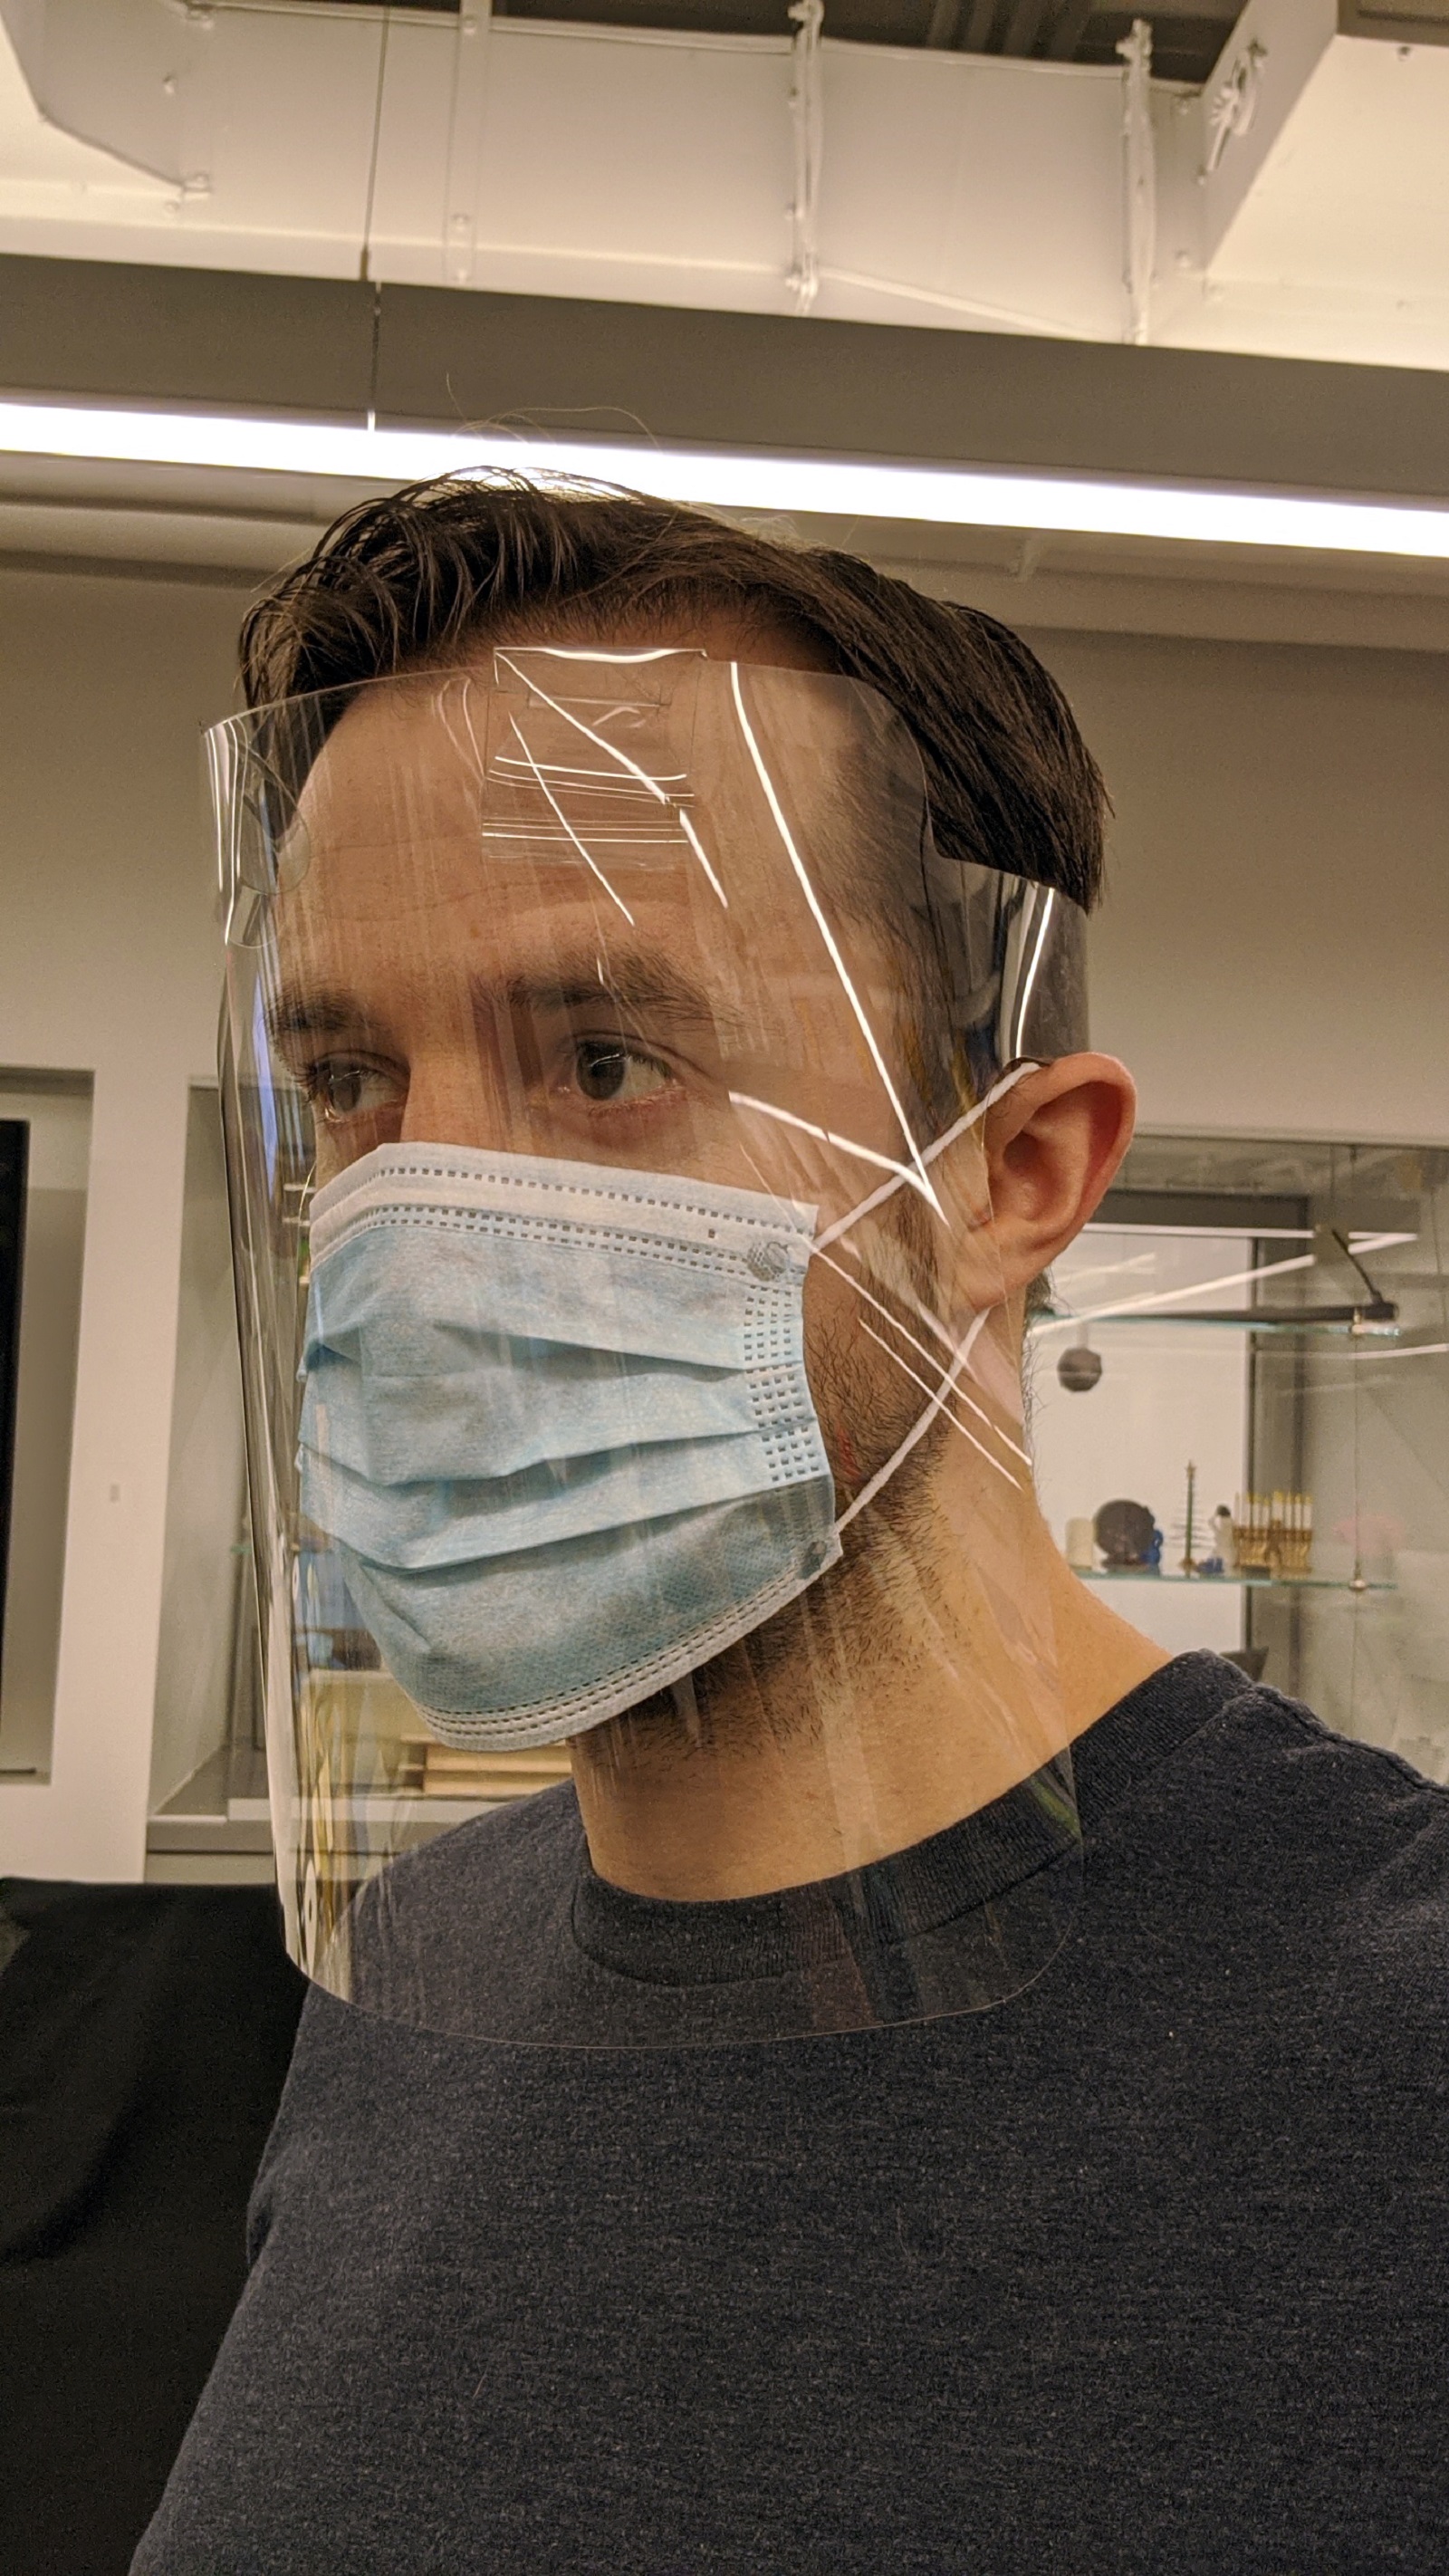 Columbia, Med Center Researchers Team to Produce 1.5M+ Face Shields